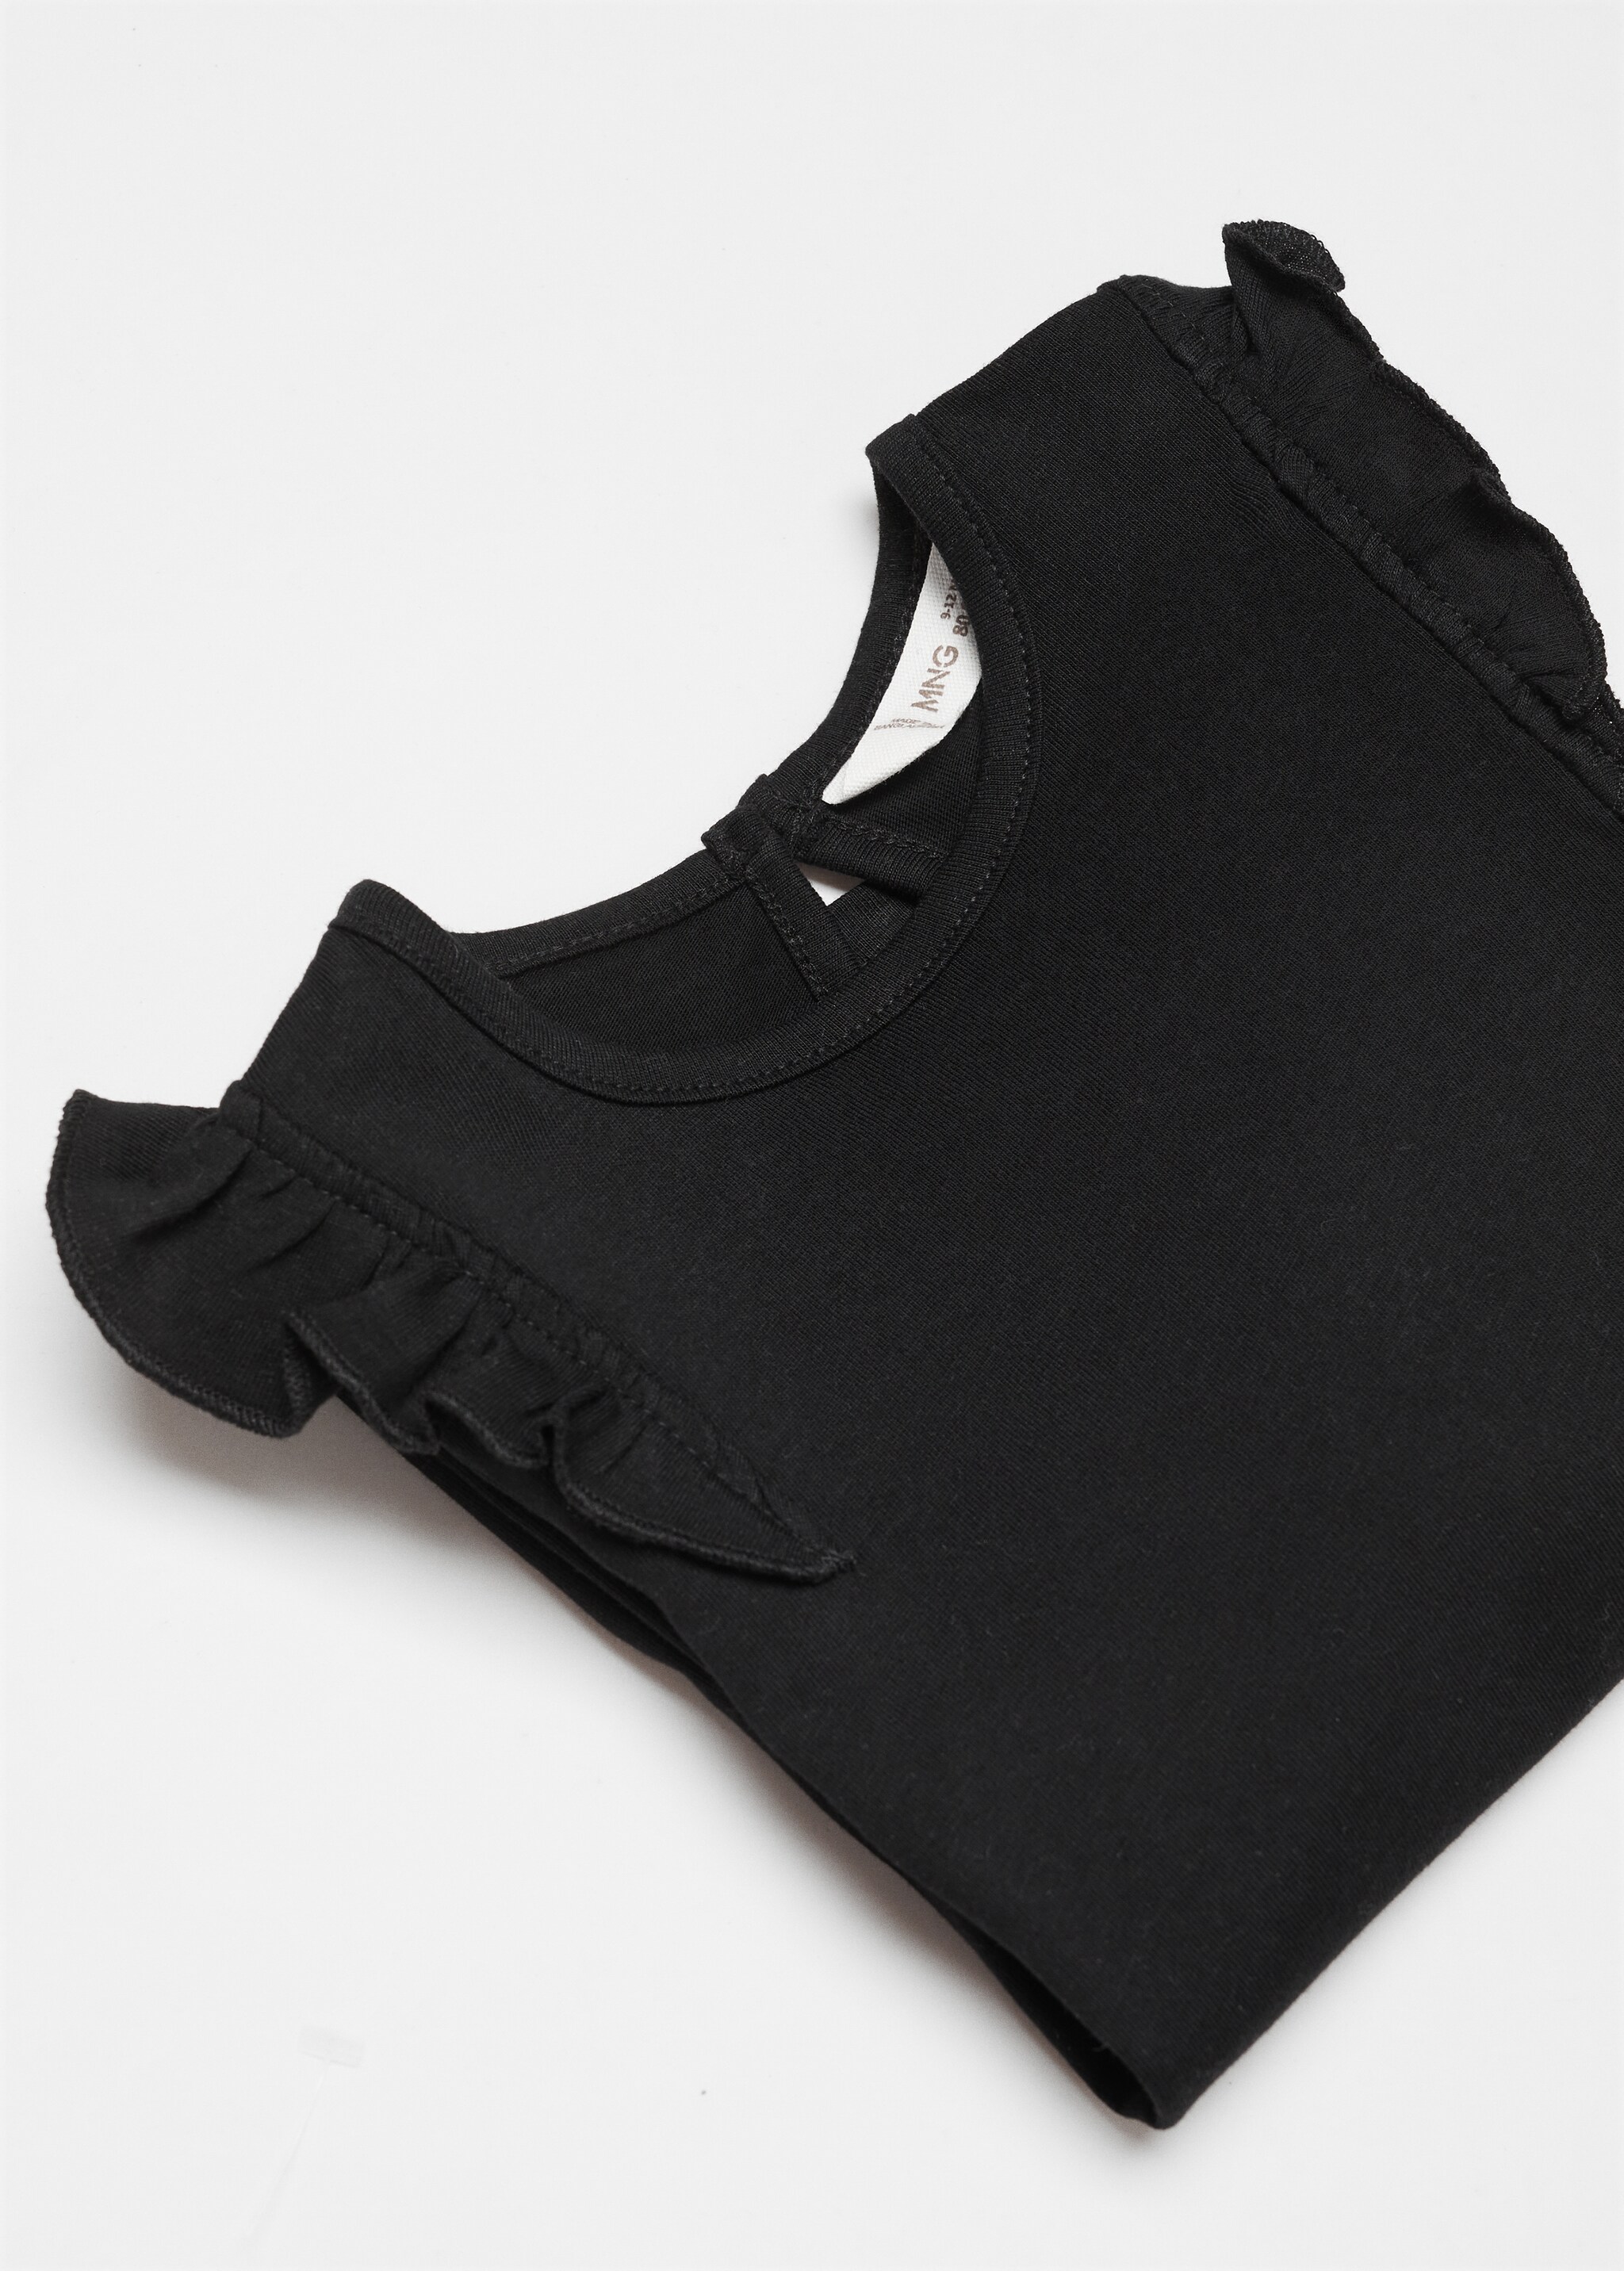 Long -sleeved t-shirt with ruffles - Details of the article 0